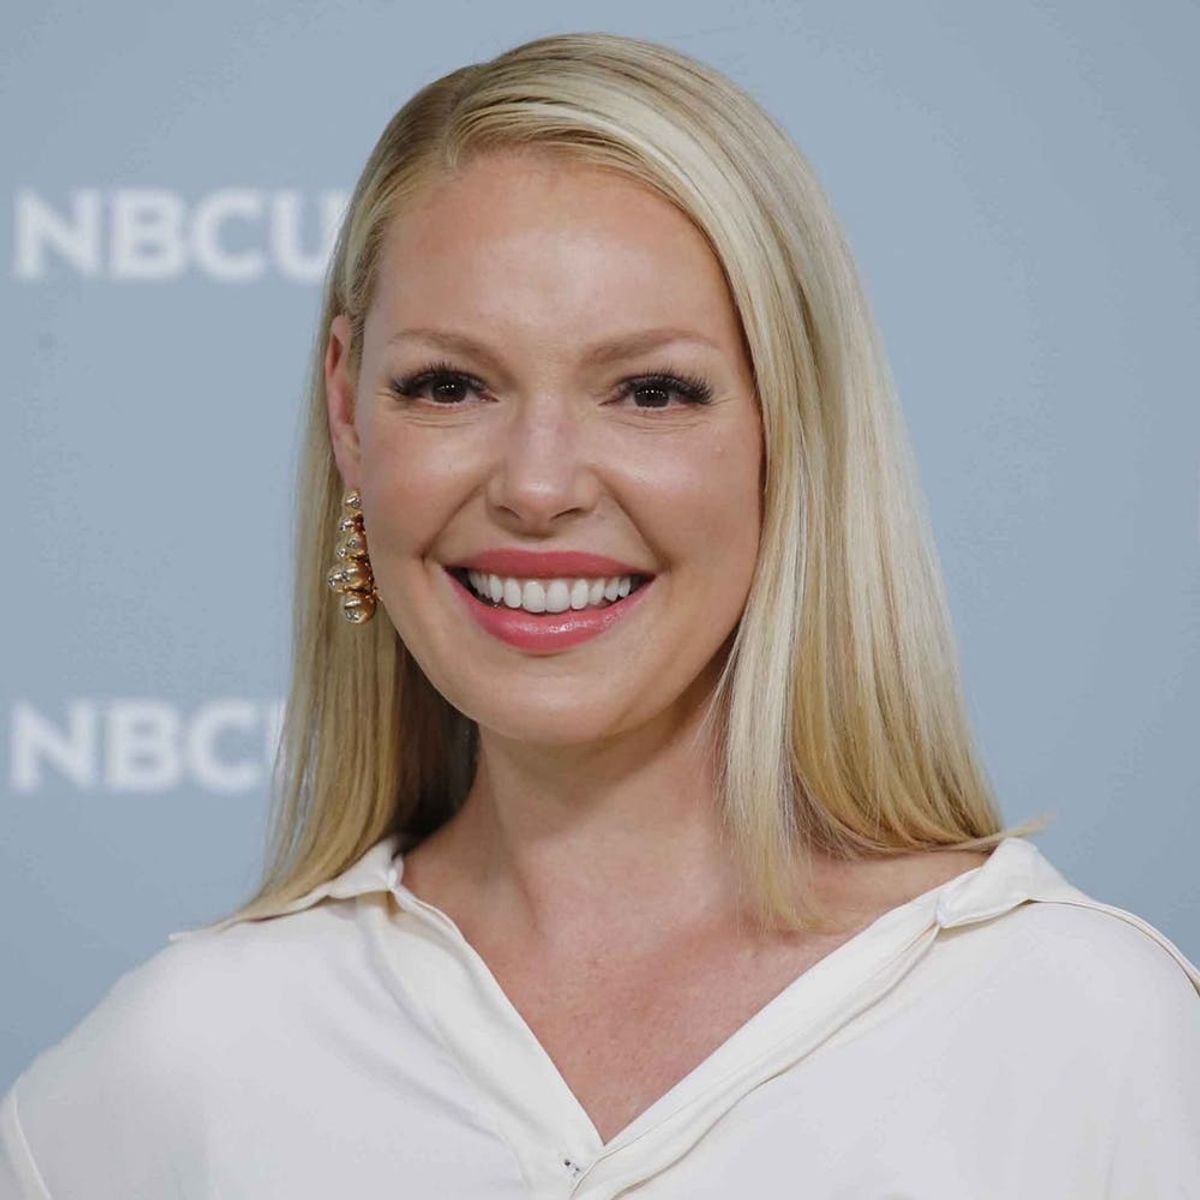 Katherine Heigl Is Shaking Things Up in This New ‘Suits’ Season 8 Teaser